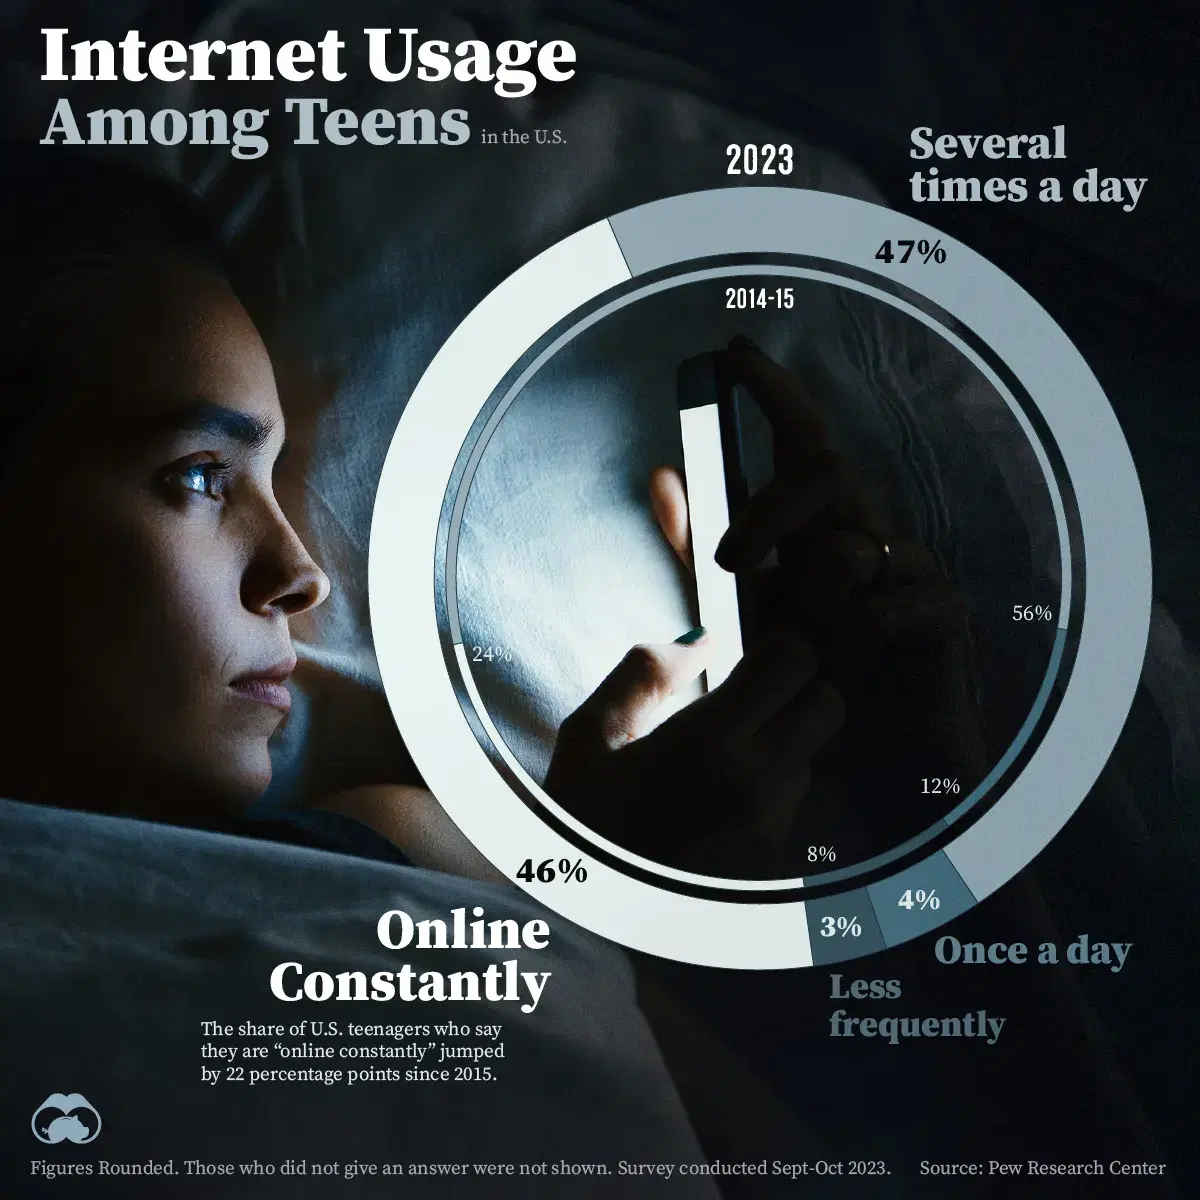 Nearly Half of U.S. Teens are Online "Constantly"